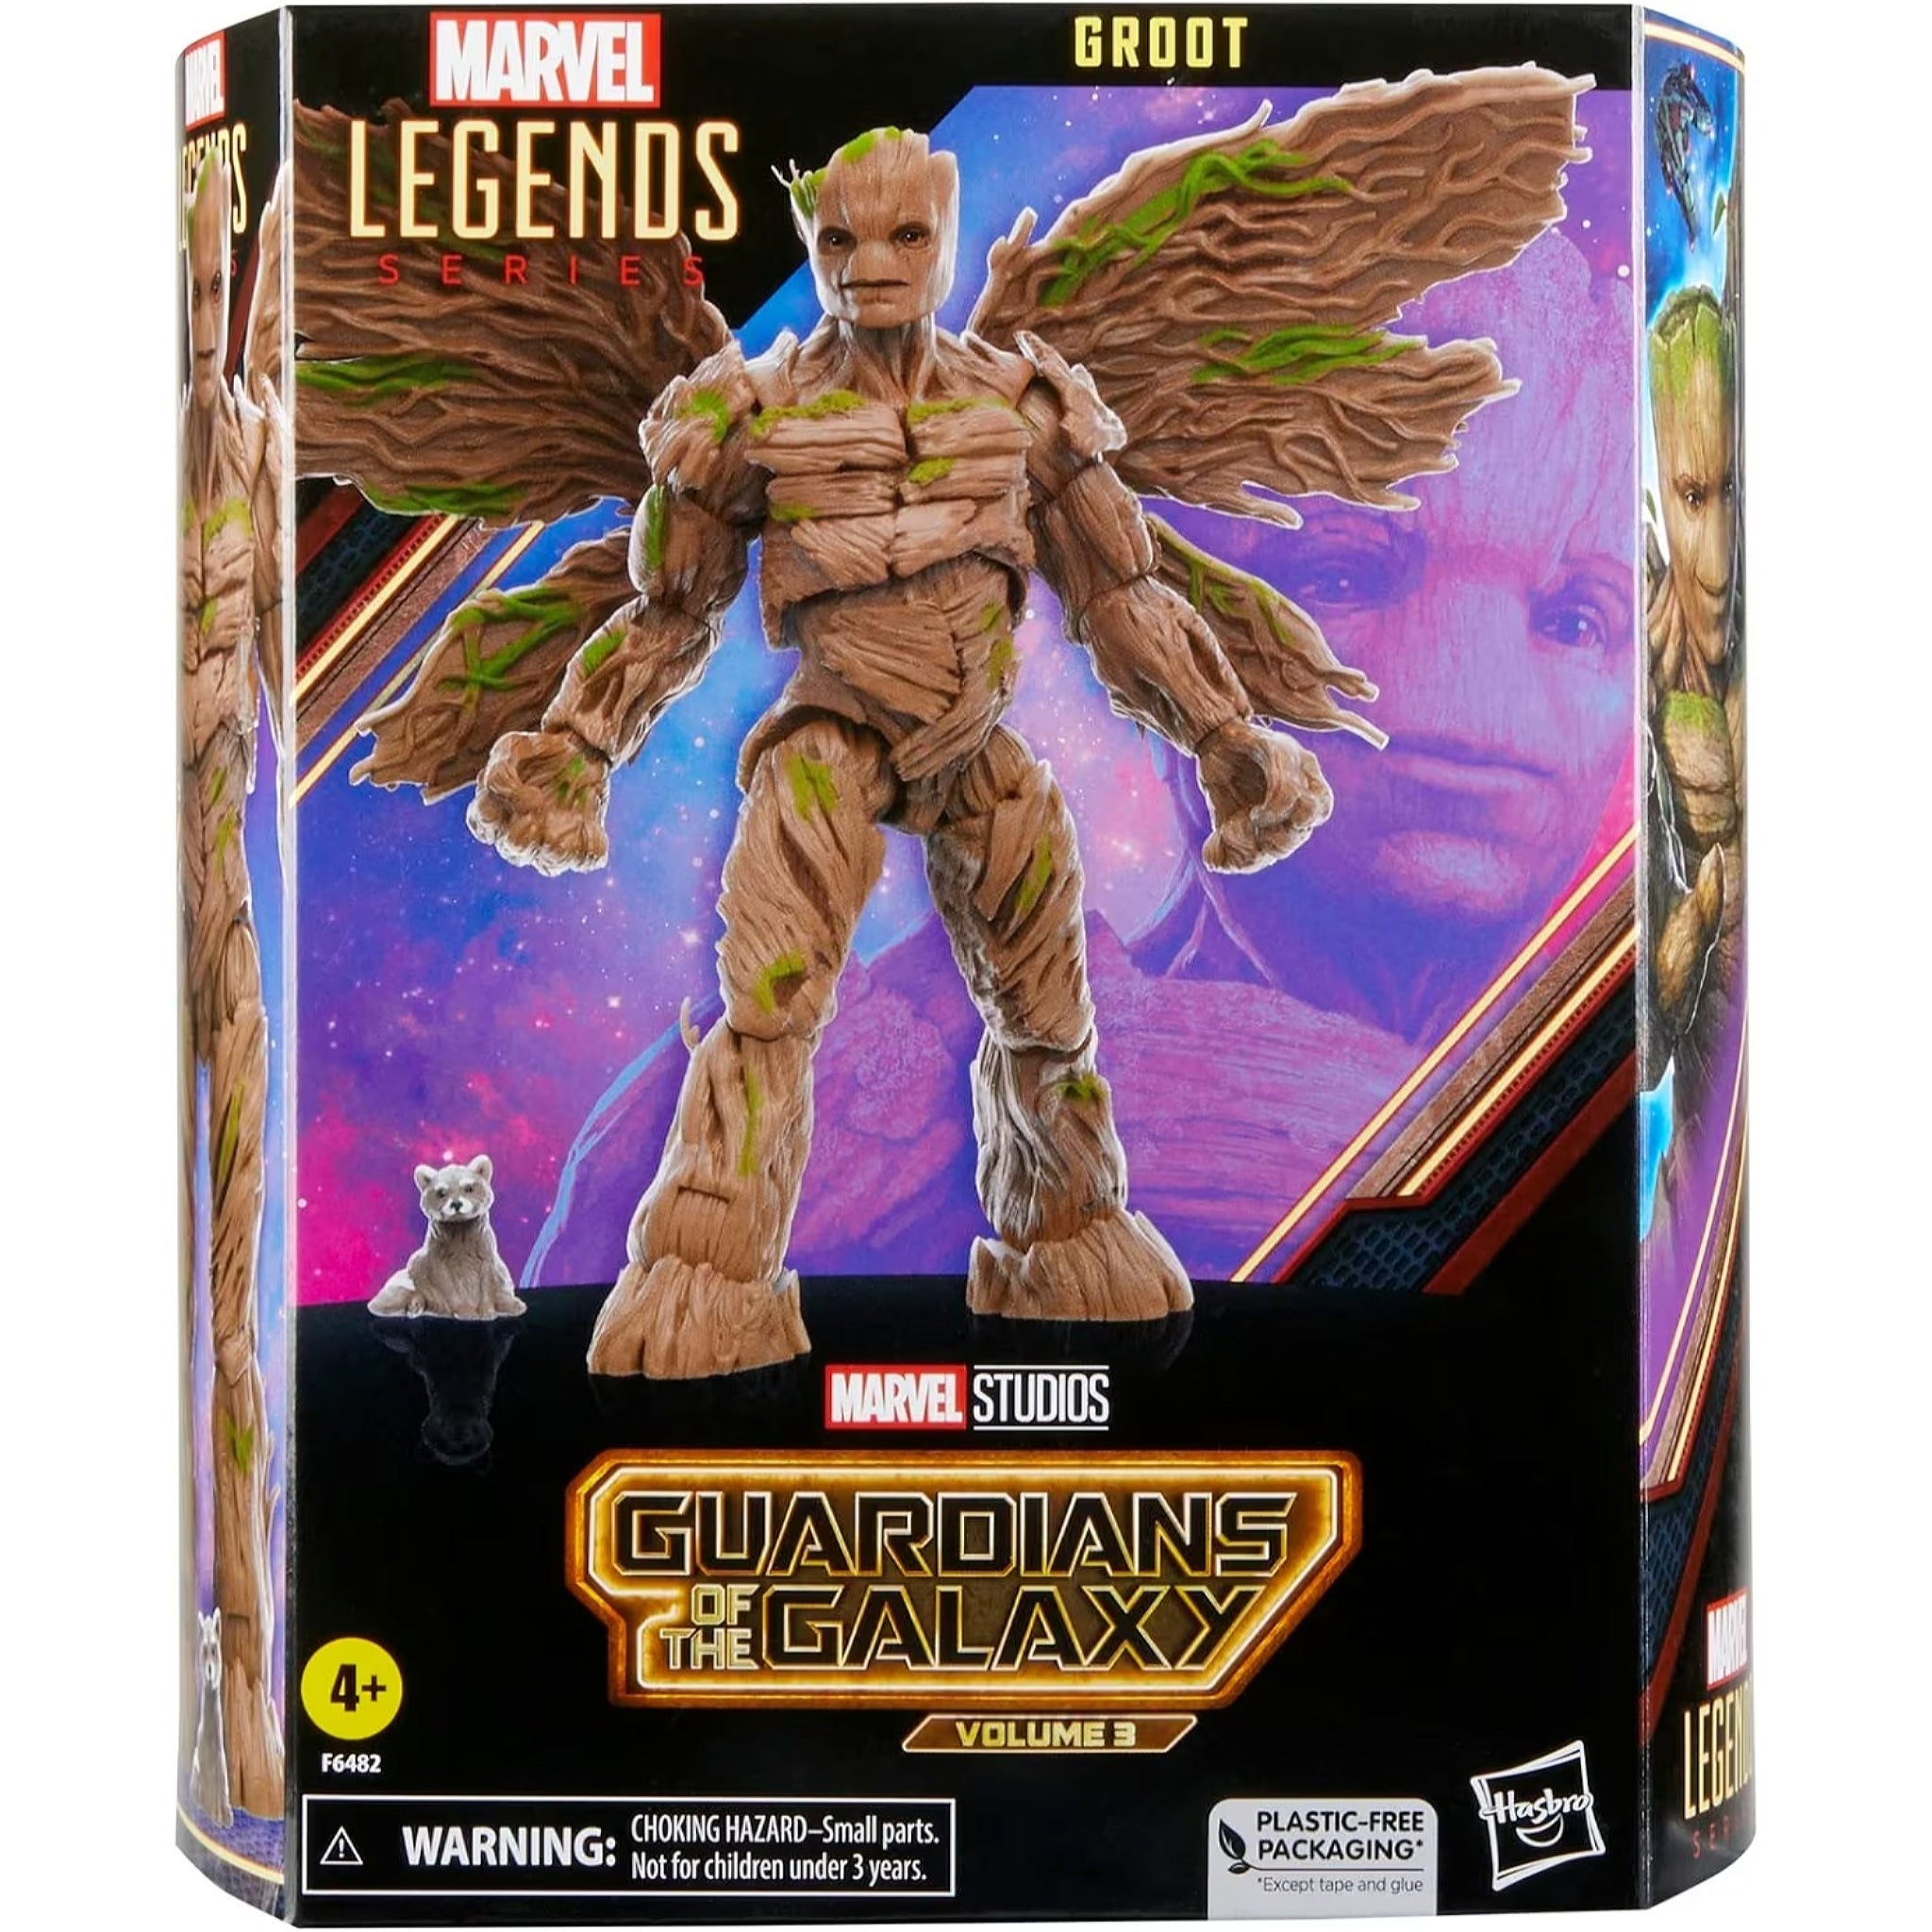 Hasbro Marvel Legends Series Groot Guardians of the Galaxy Vol. 3 6 Inch Figure